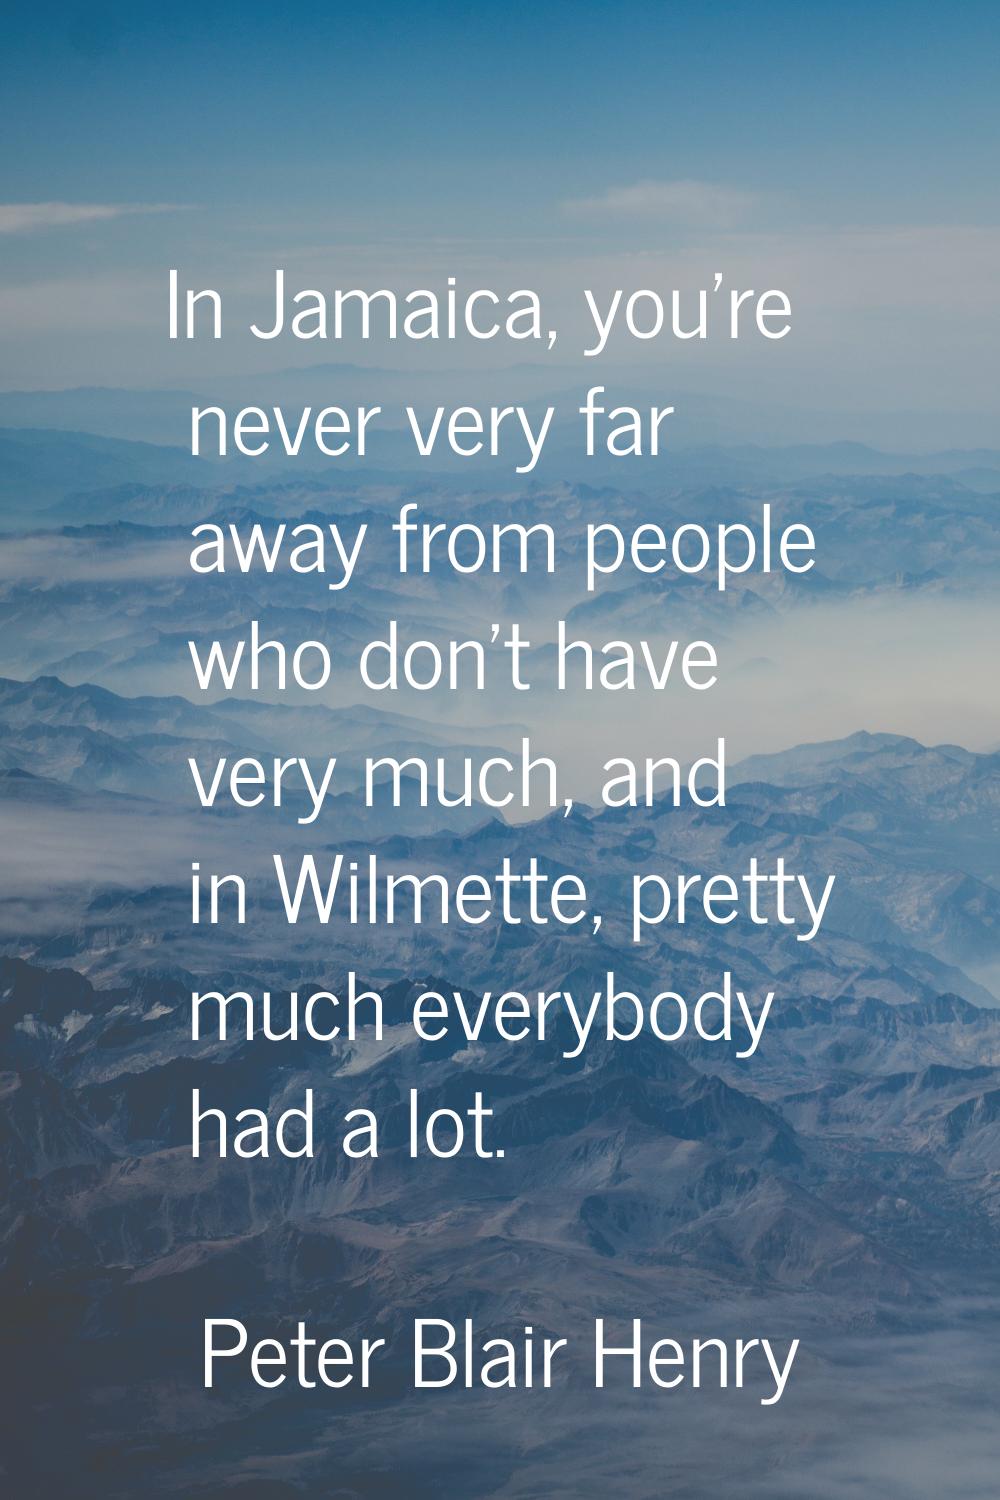 In Jamaica, you're never very far away from people who don't have very much, and in Wilmette, prett